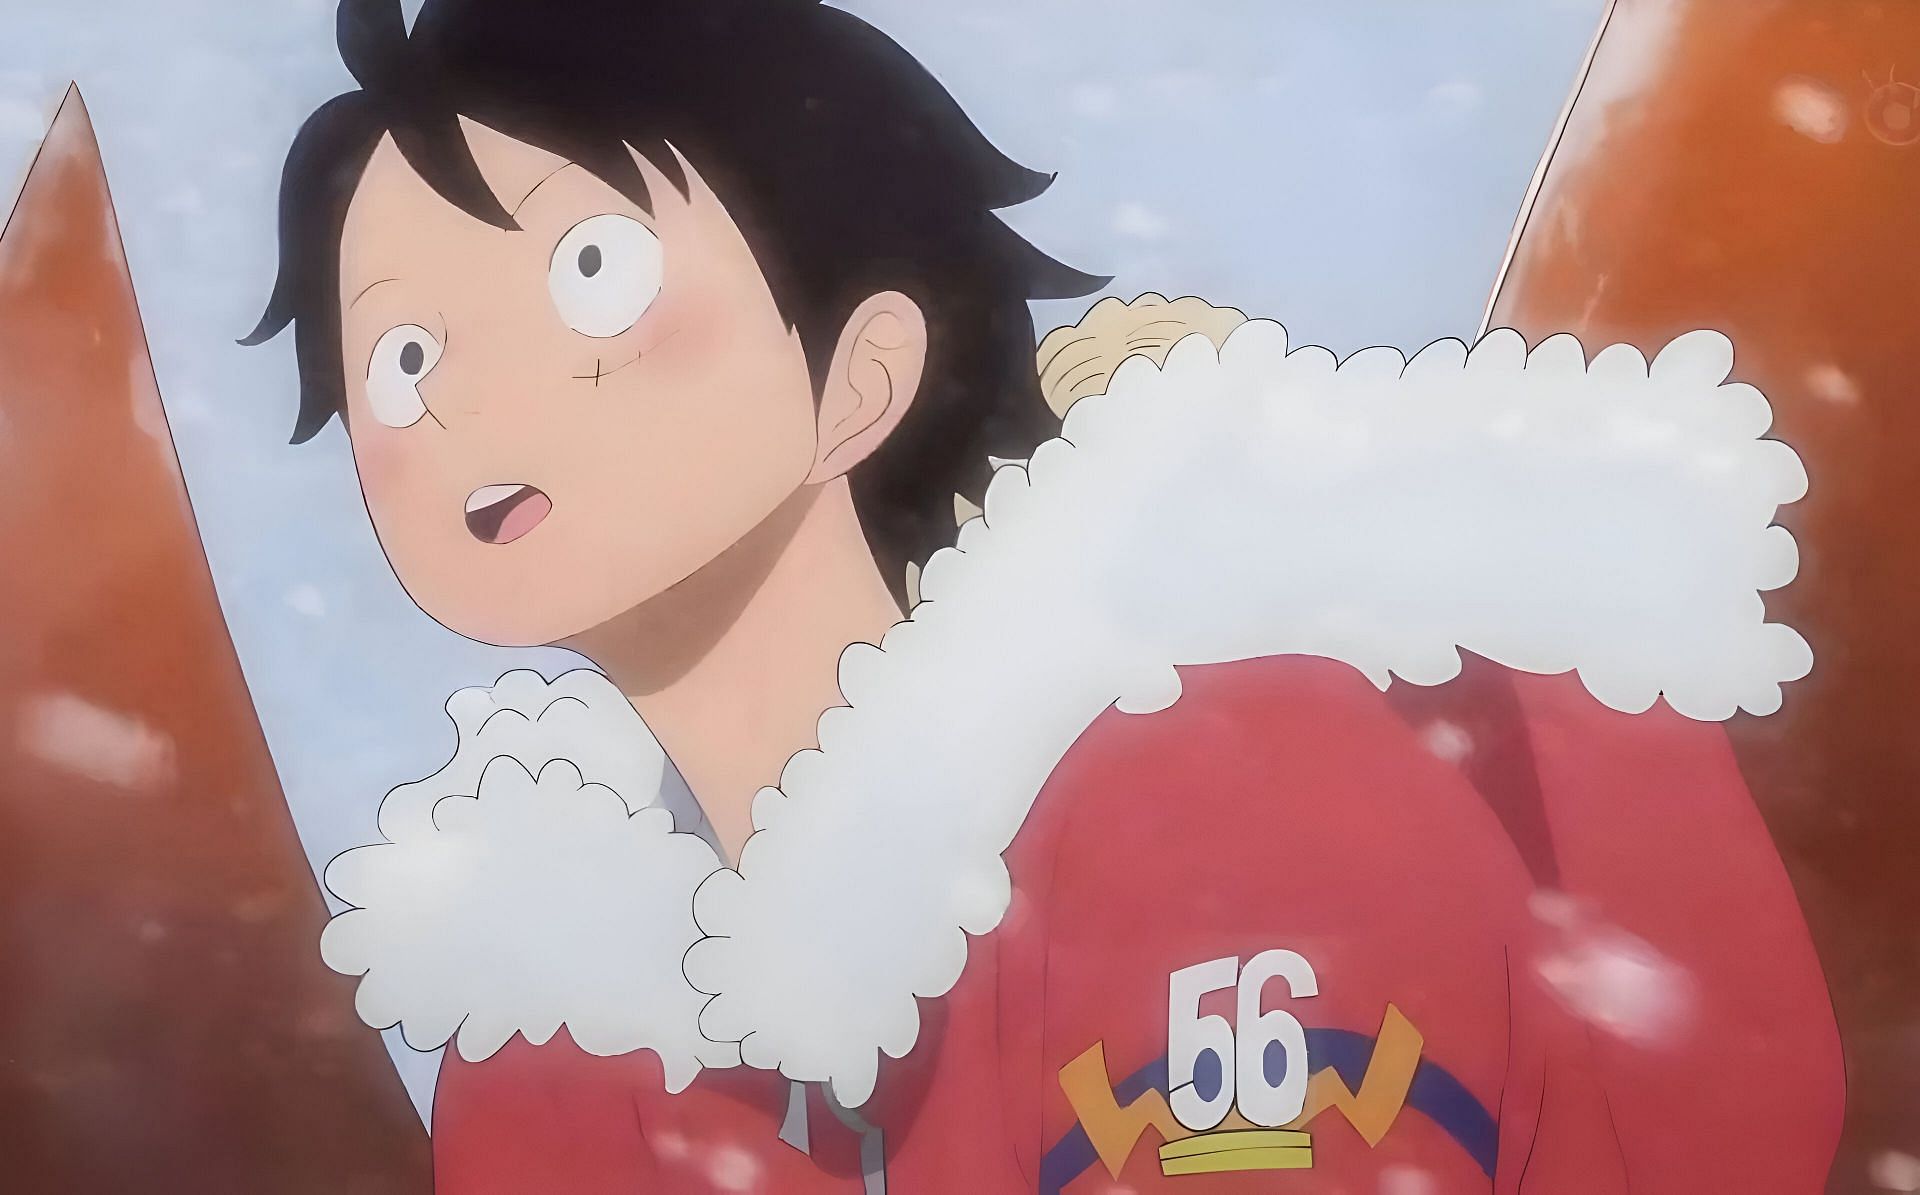 Monkey D Luffy as seen in the anime (Image via Toei Animation)